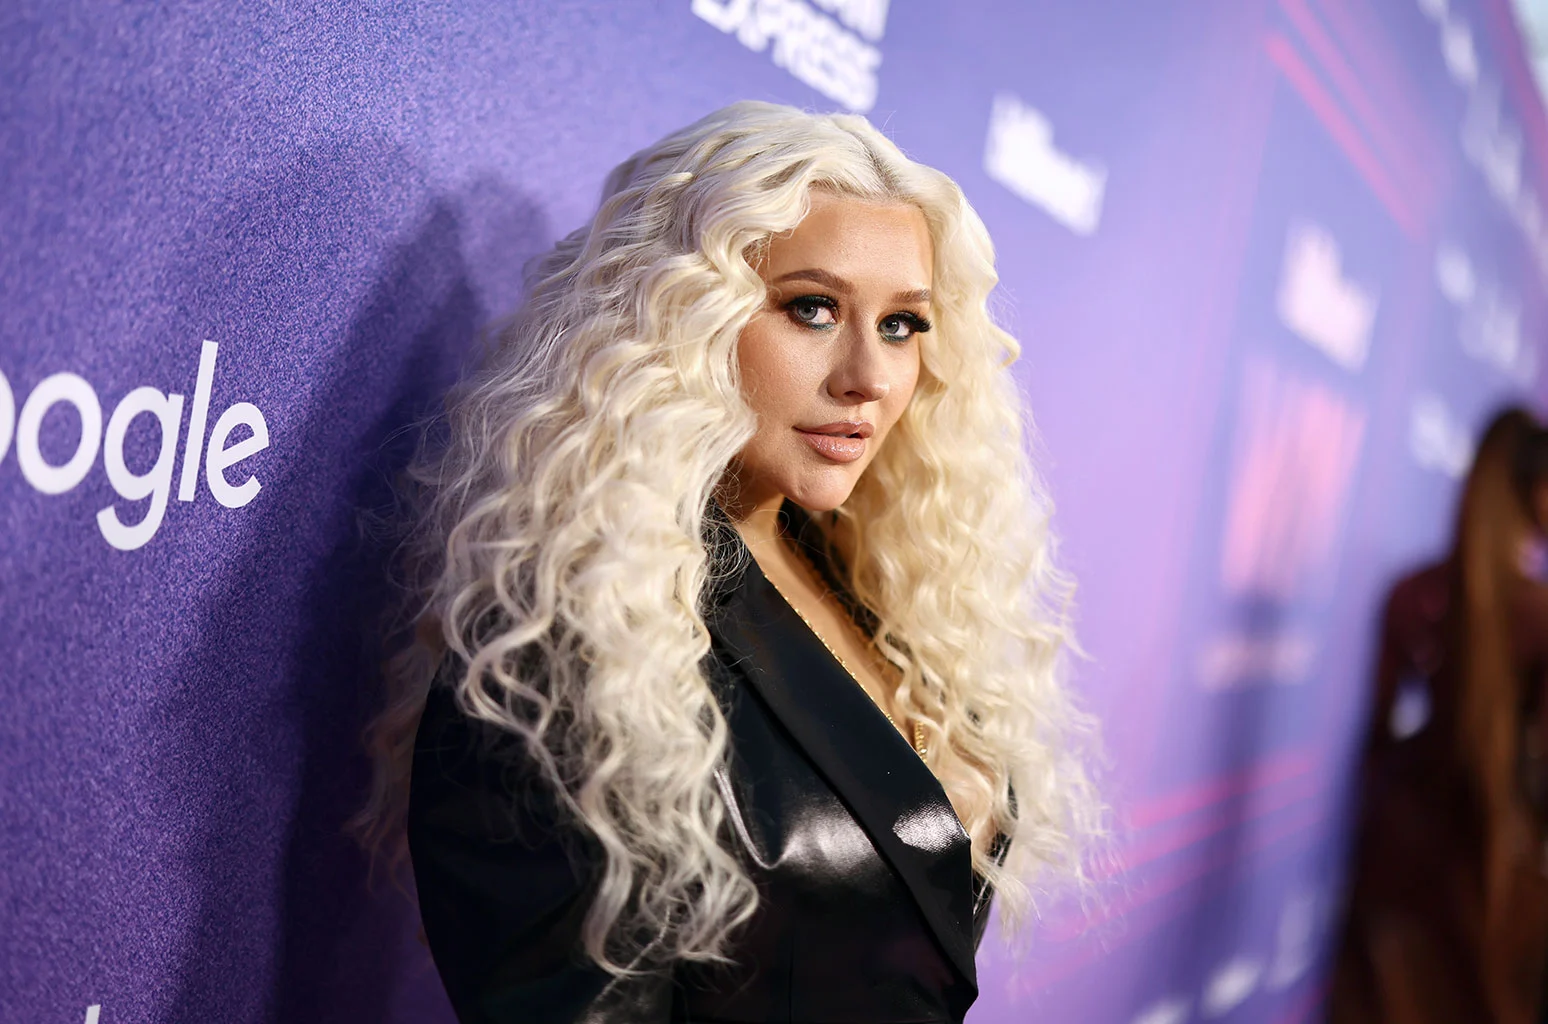 Christina Aguilera’s ‘La Tormenta’ EP & Sultry Tini Collab Have Arrived: Stream It Now